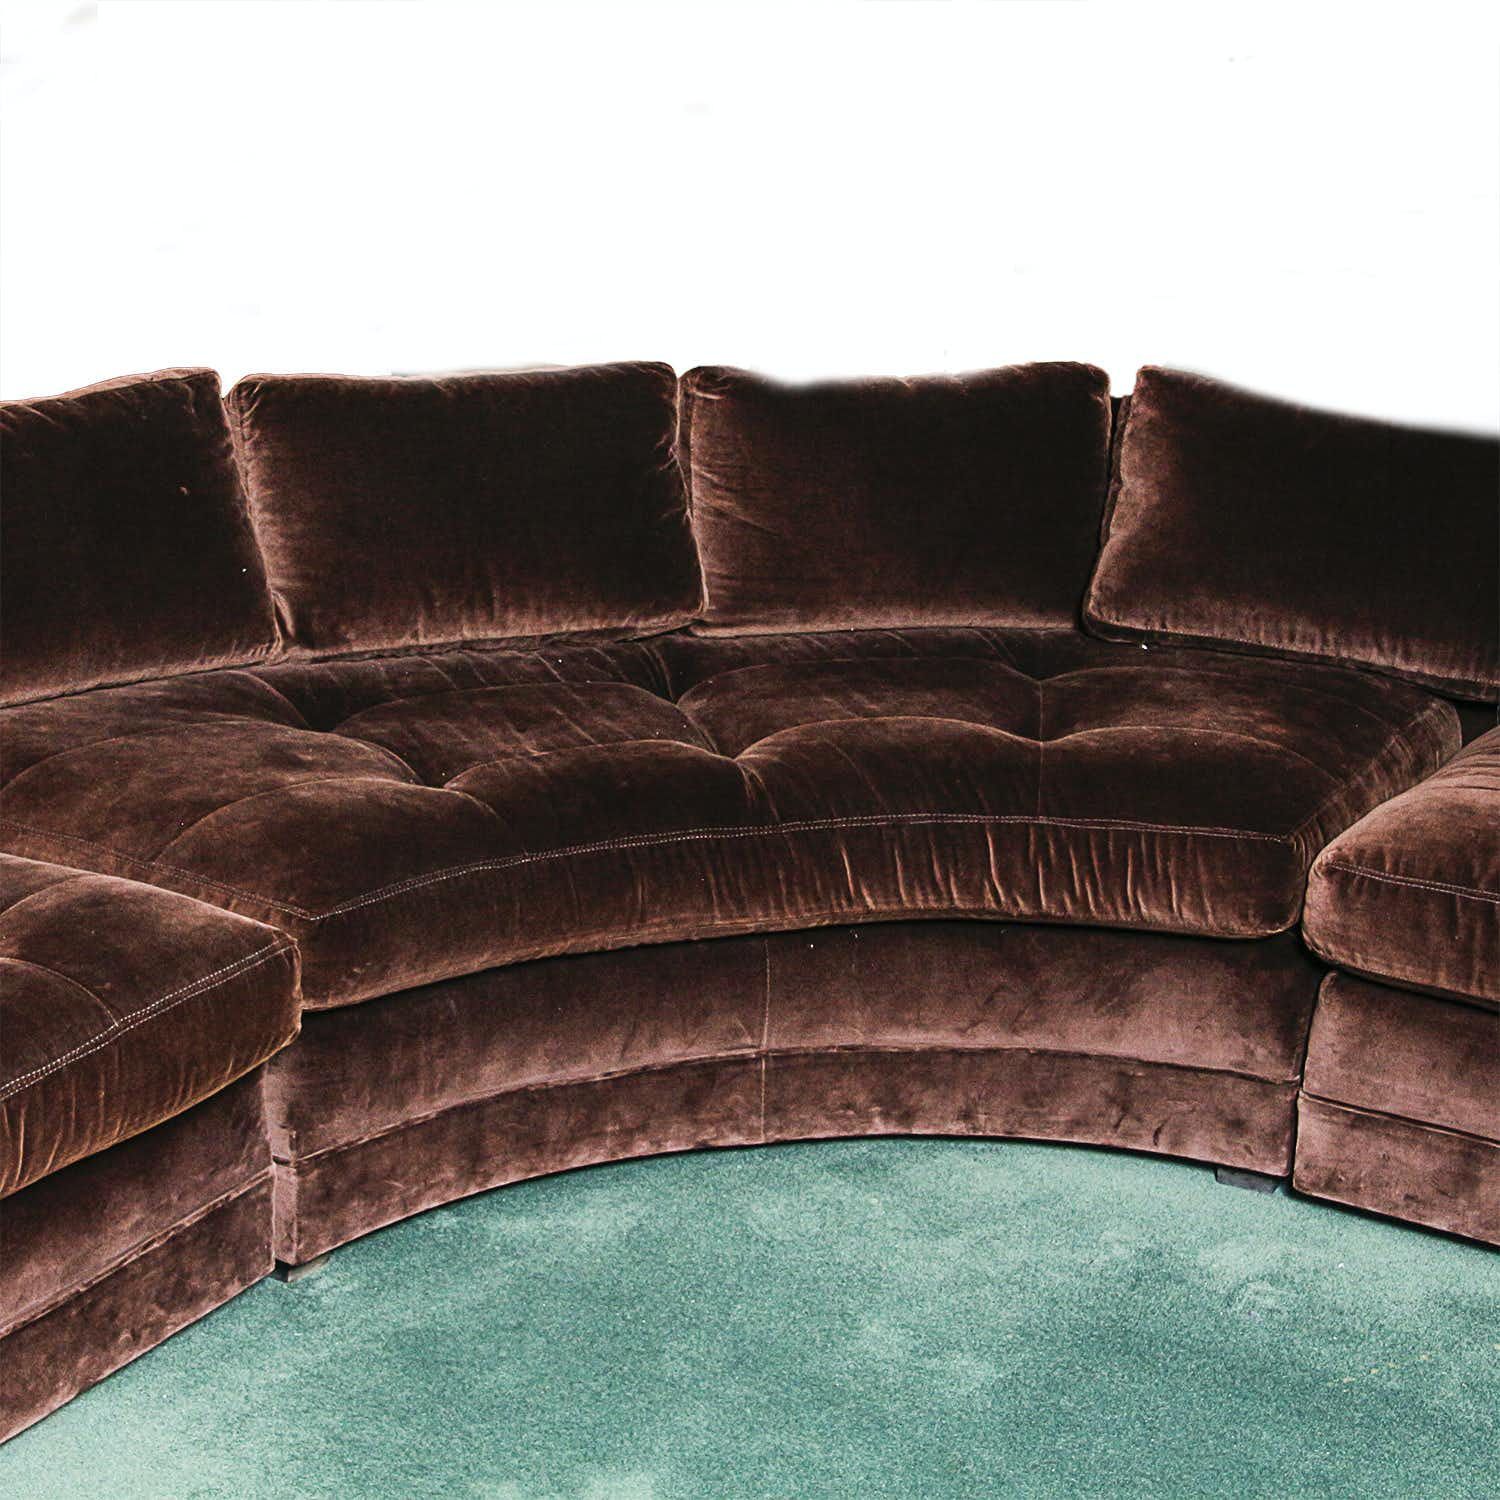 Chocolate Brown Velvet Upholstered Sectional Sofa : Ebth Inside Sofas In Chocolate Brown (Gallery 11 of 20)